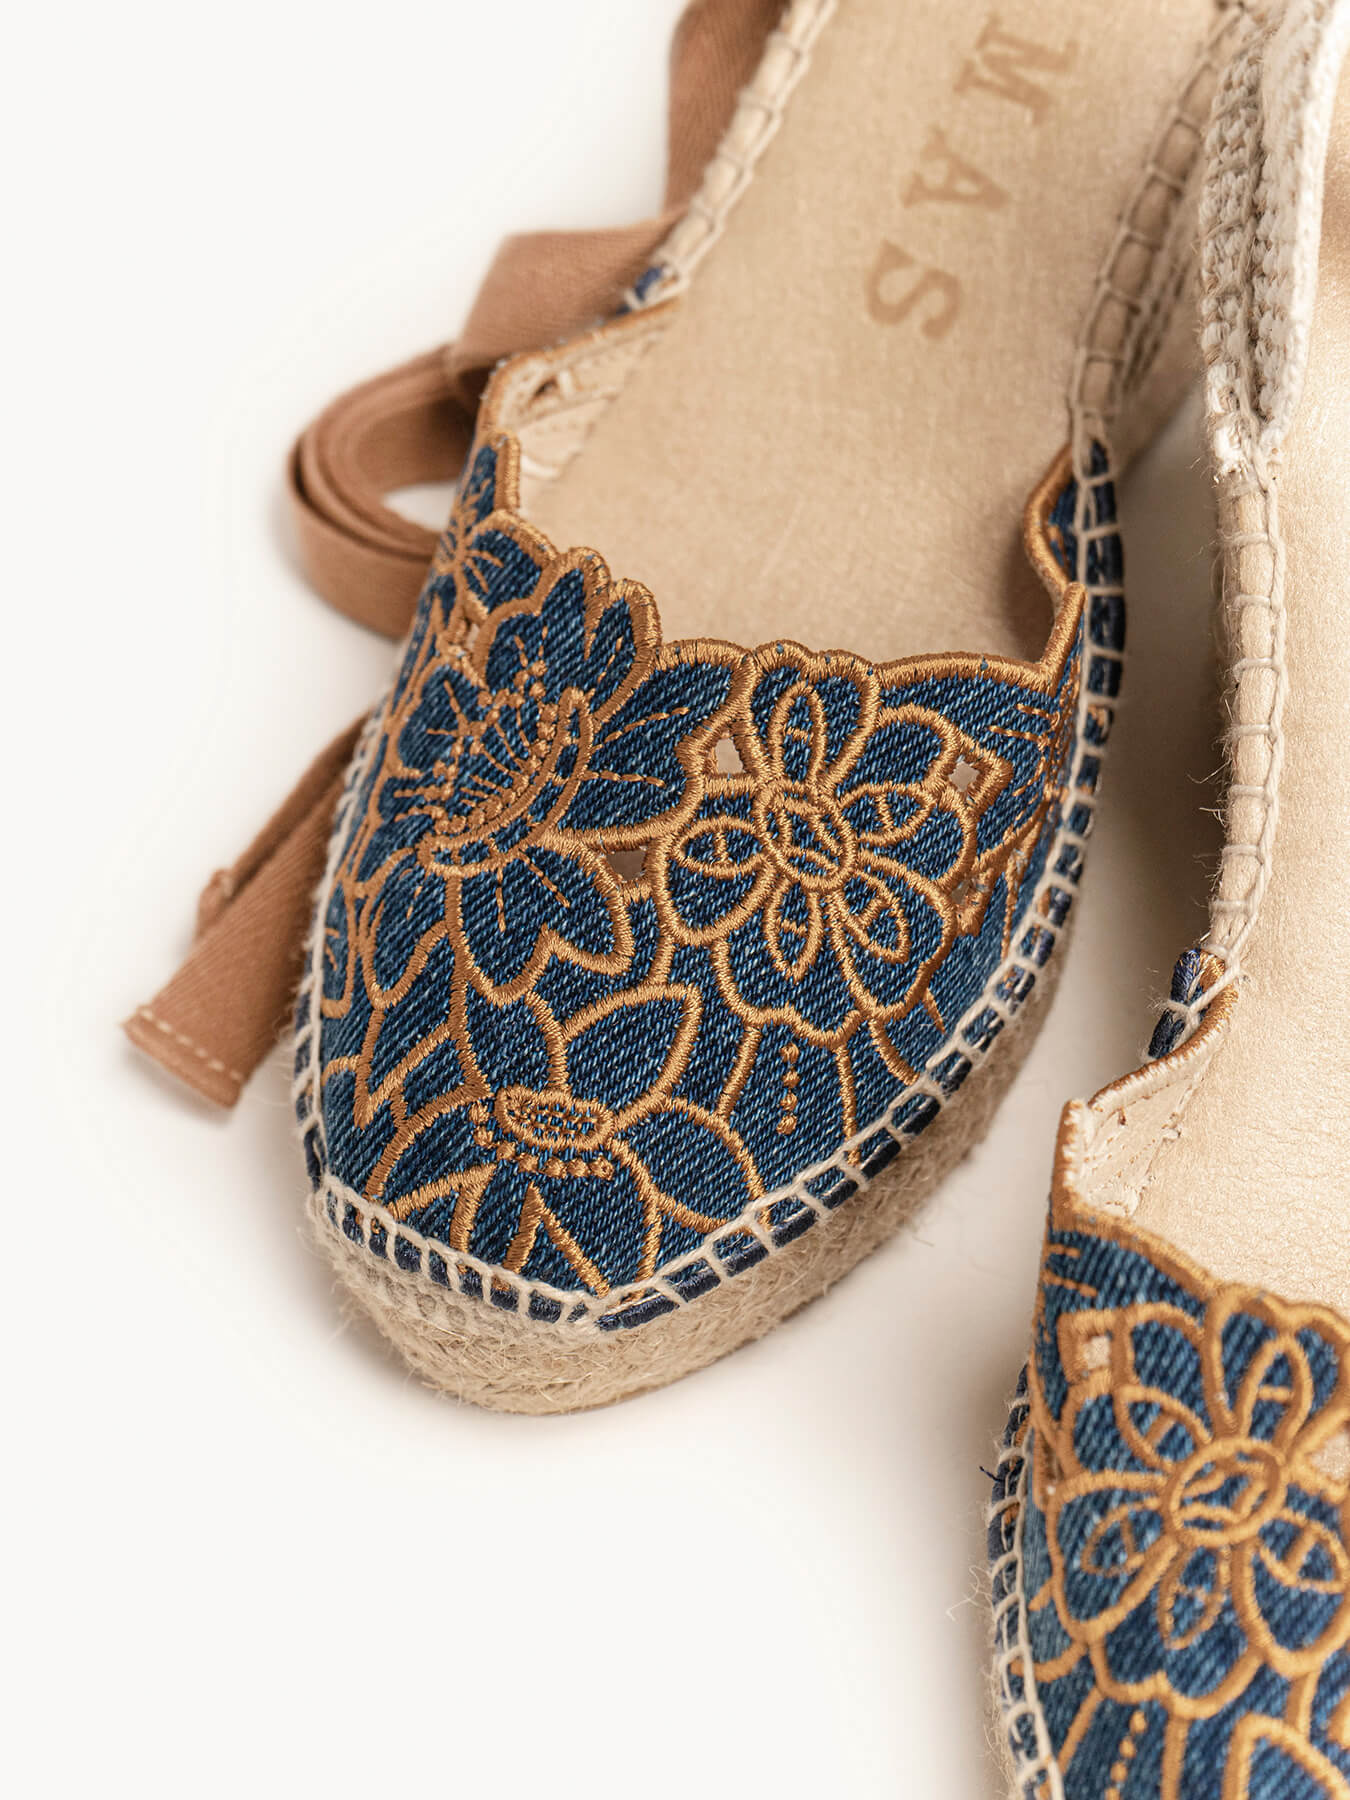 Romero High Wedge Wild Embroidery Blue Jeans